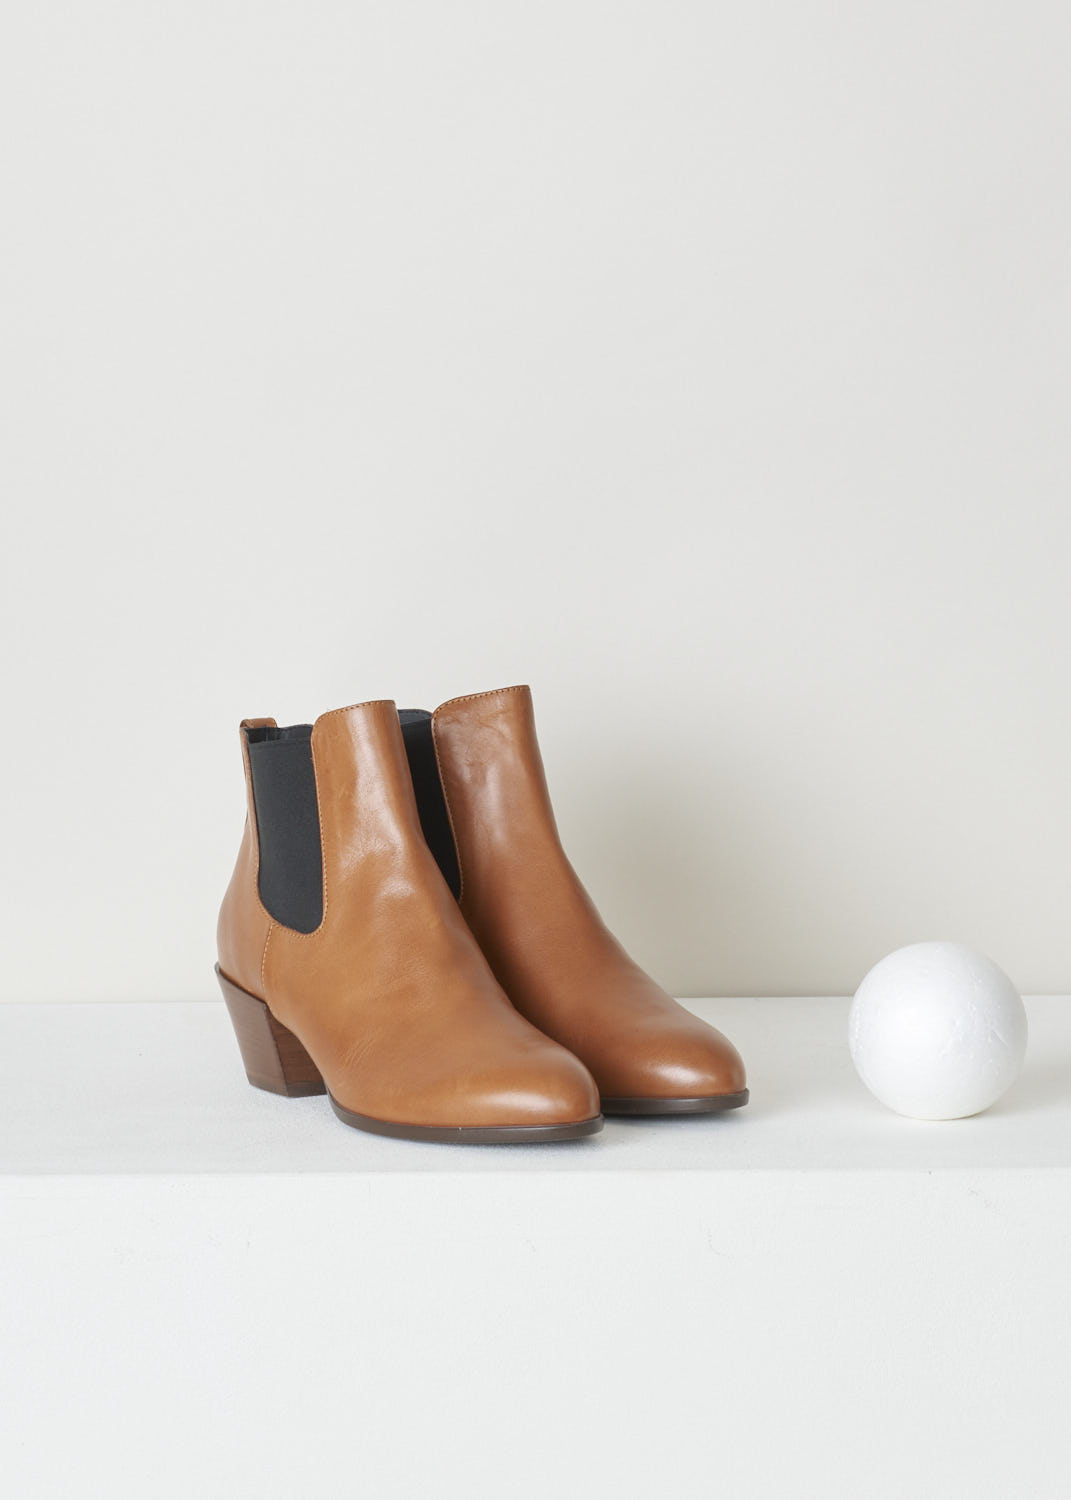 HOGAN, COGNAC CHELSEA BOOTS, HXW4740W890LEHS003, Brown, Front, Cognac colored Chelsea boots featuring a contrasting black elastic side panel and a pull tab on the back of the boot. These boots have a small heel and a pointed toe.  

Heel height: 5.5 cm / 2.1 inch
